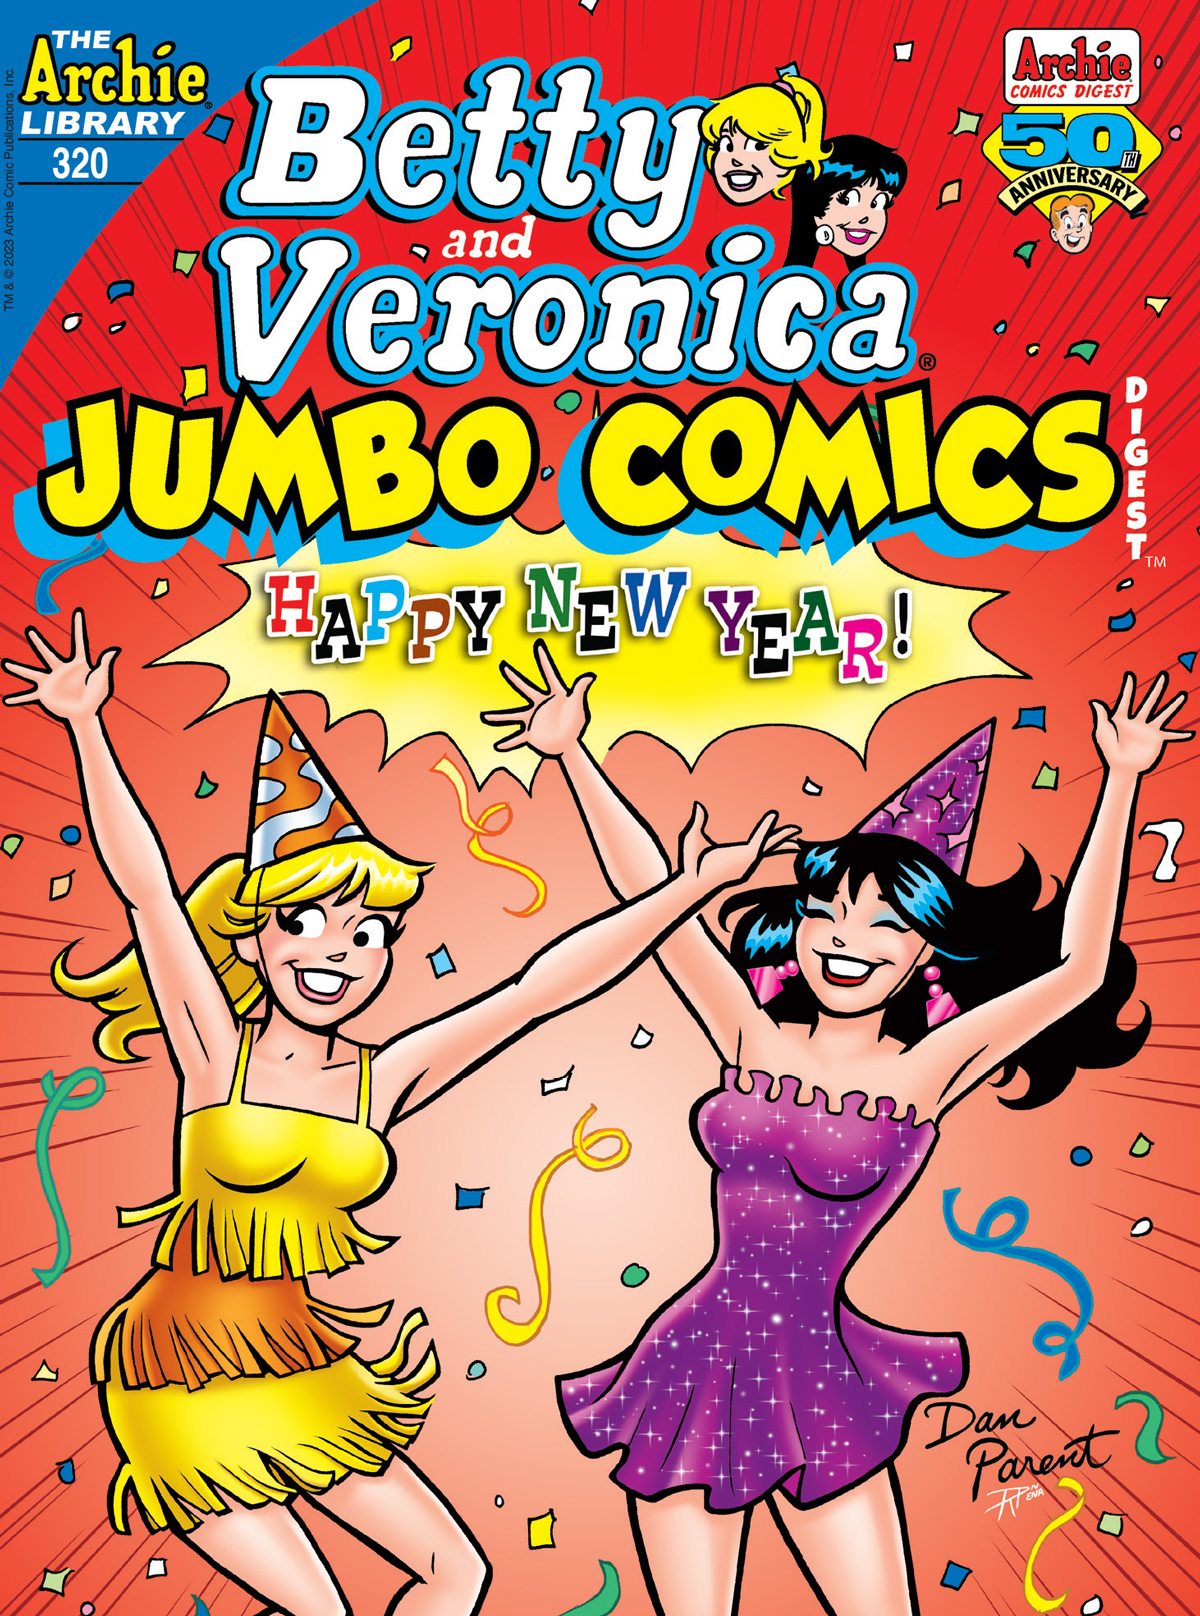 The cover of BETTY & VERONICA DIGEST #320. Betty and Veronica celebrate the new year with party hats and streamers.